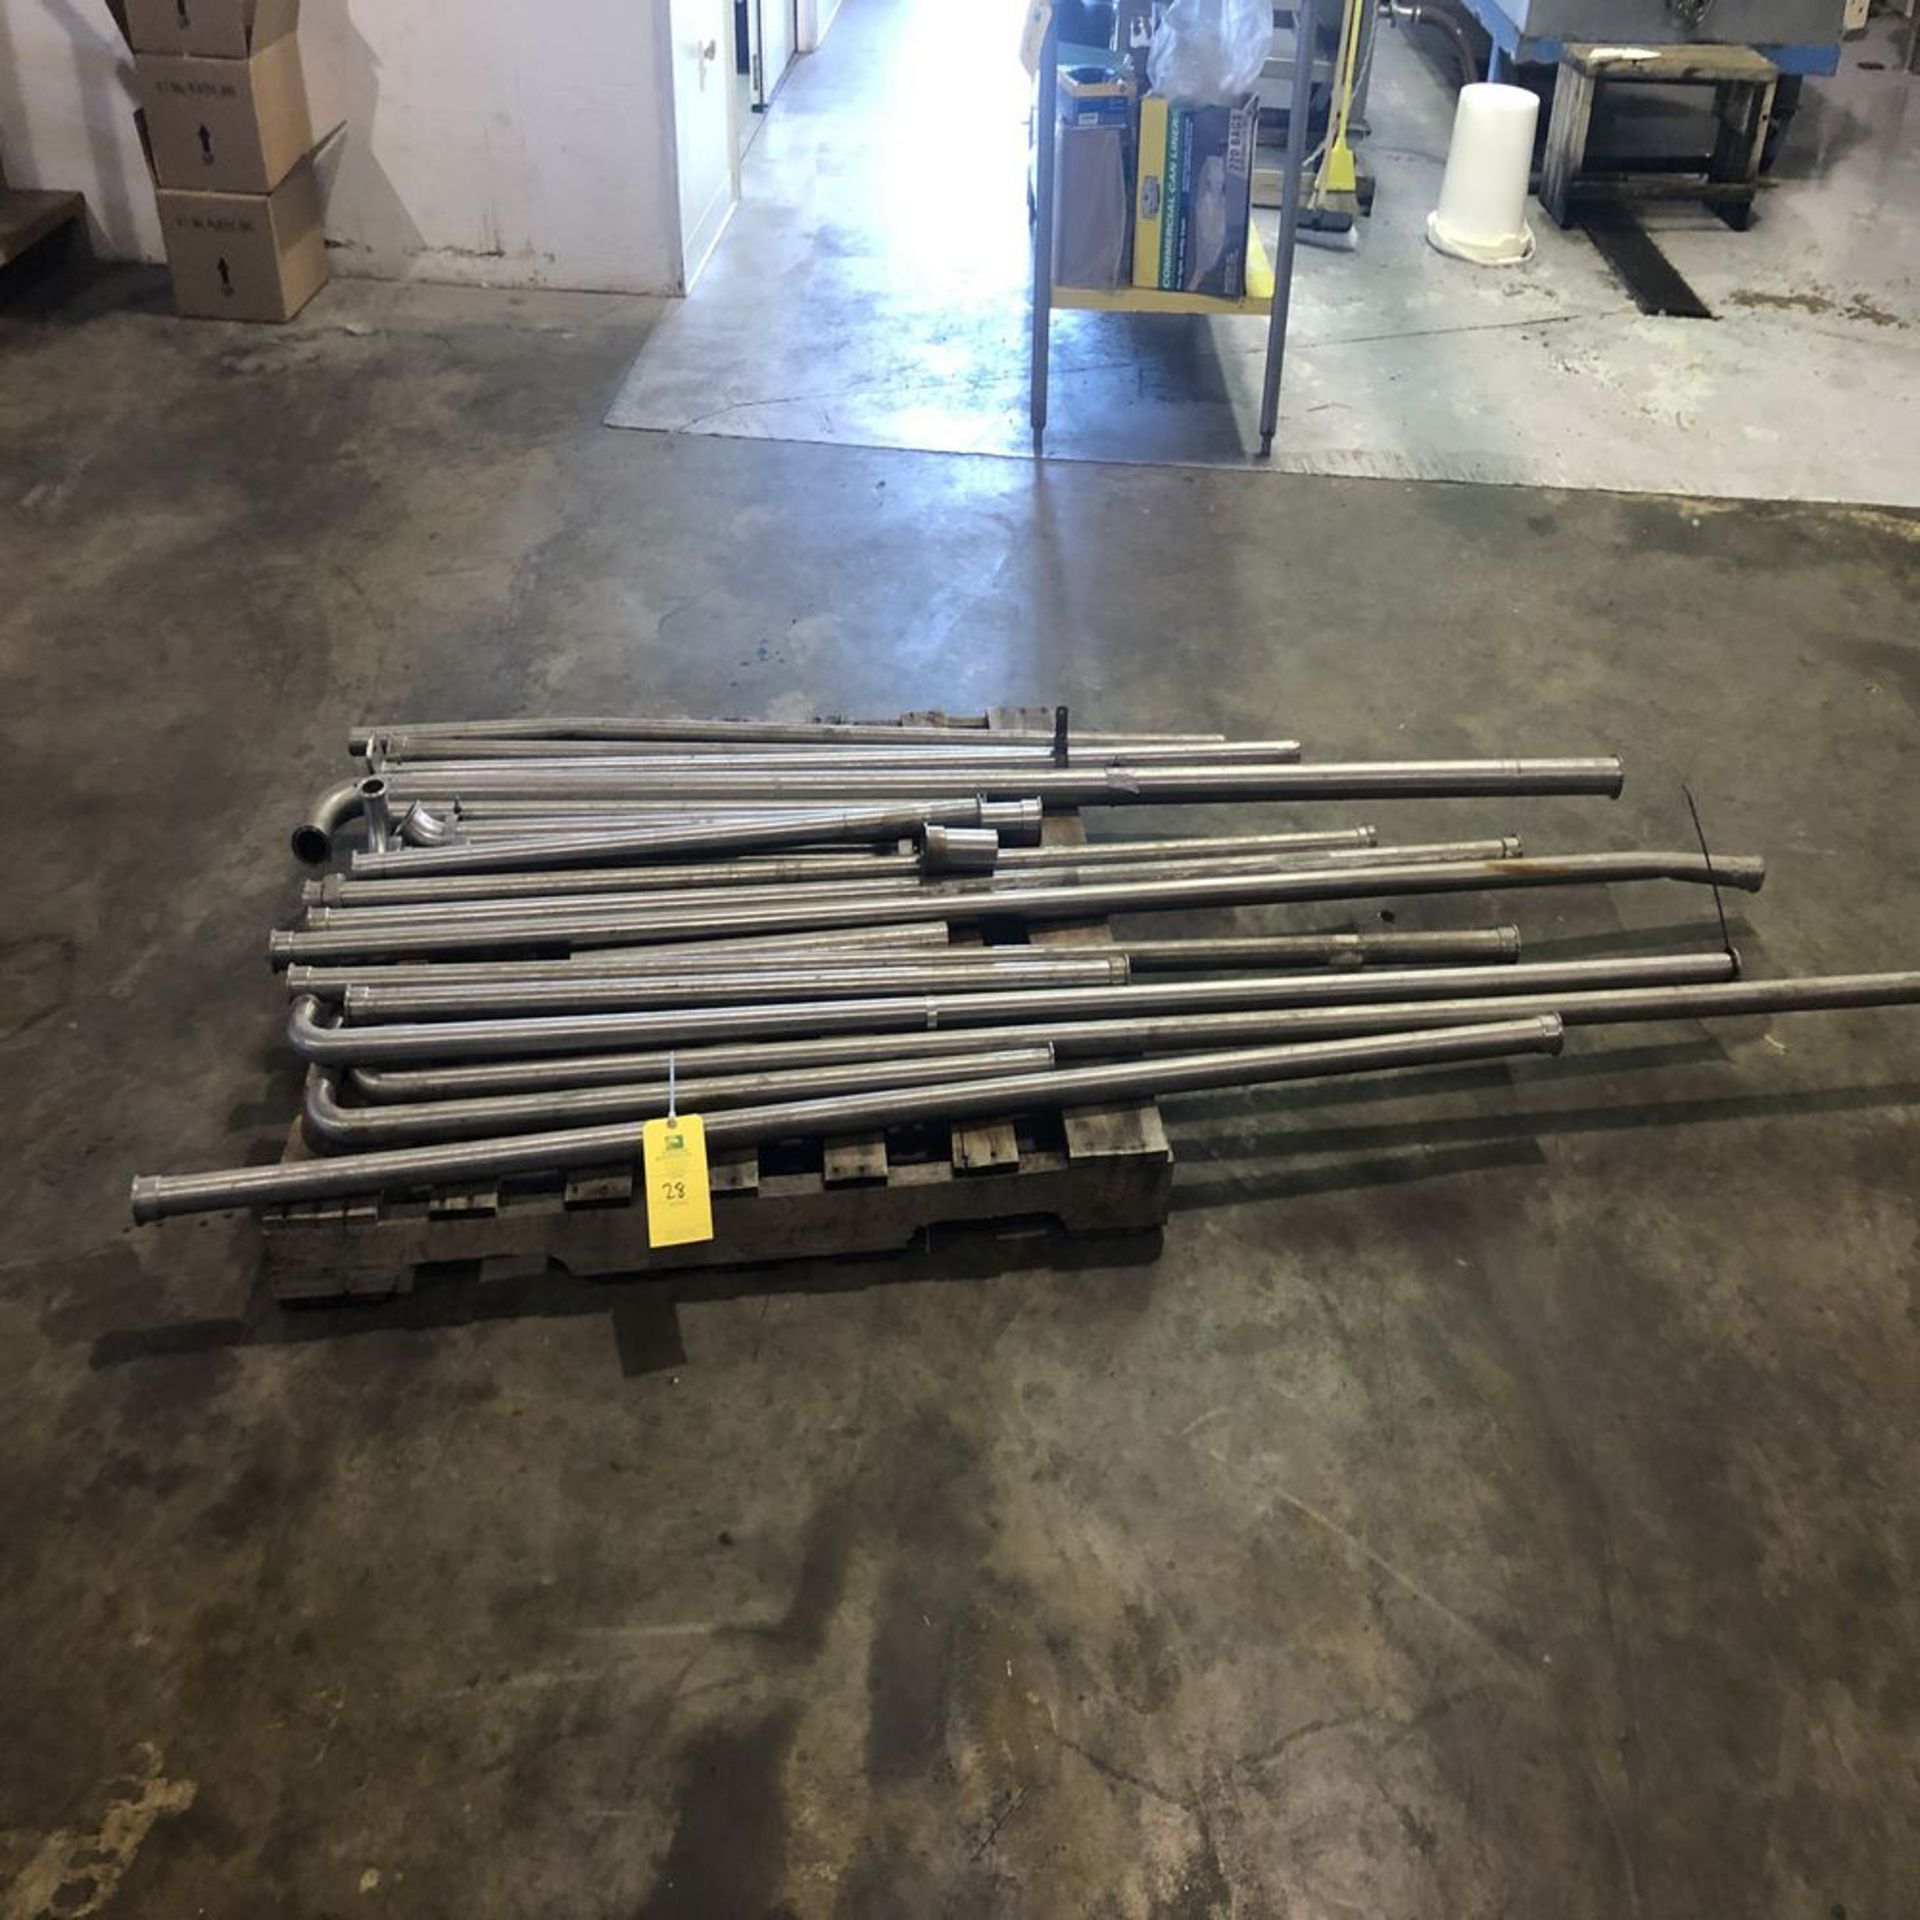 Pallet of Food Grade Stainless Steel Piping, Rigging Price: $40